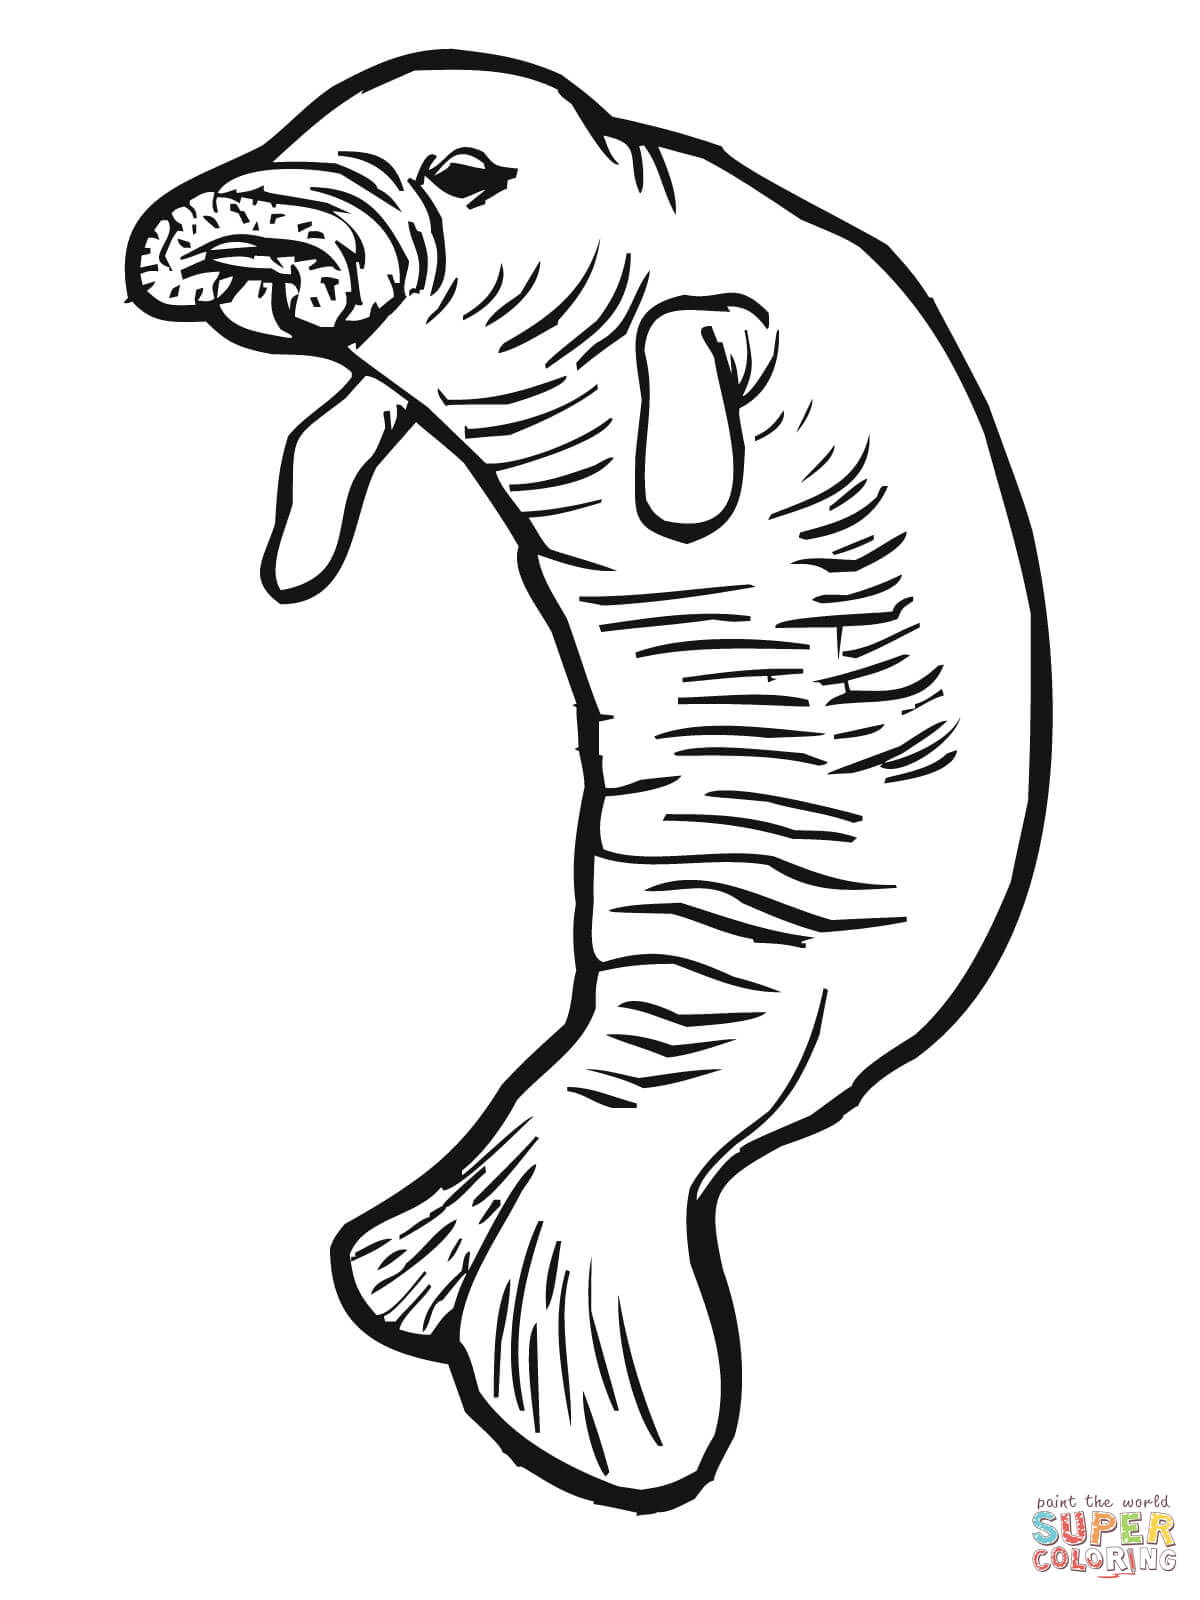 Manatee coloring pages | Free Coloring Pages